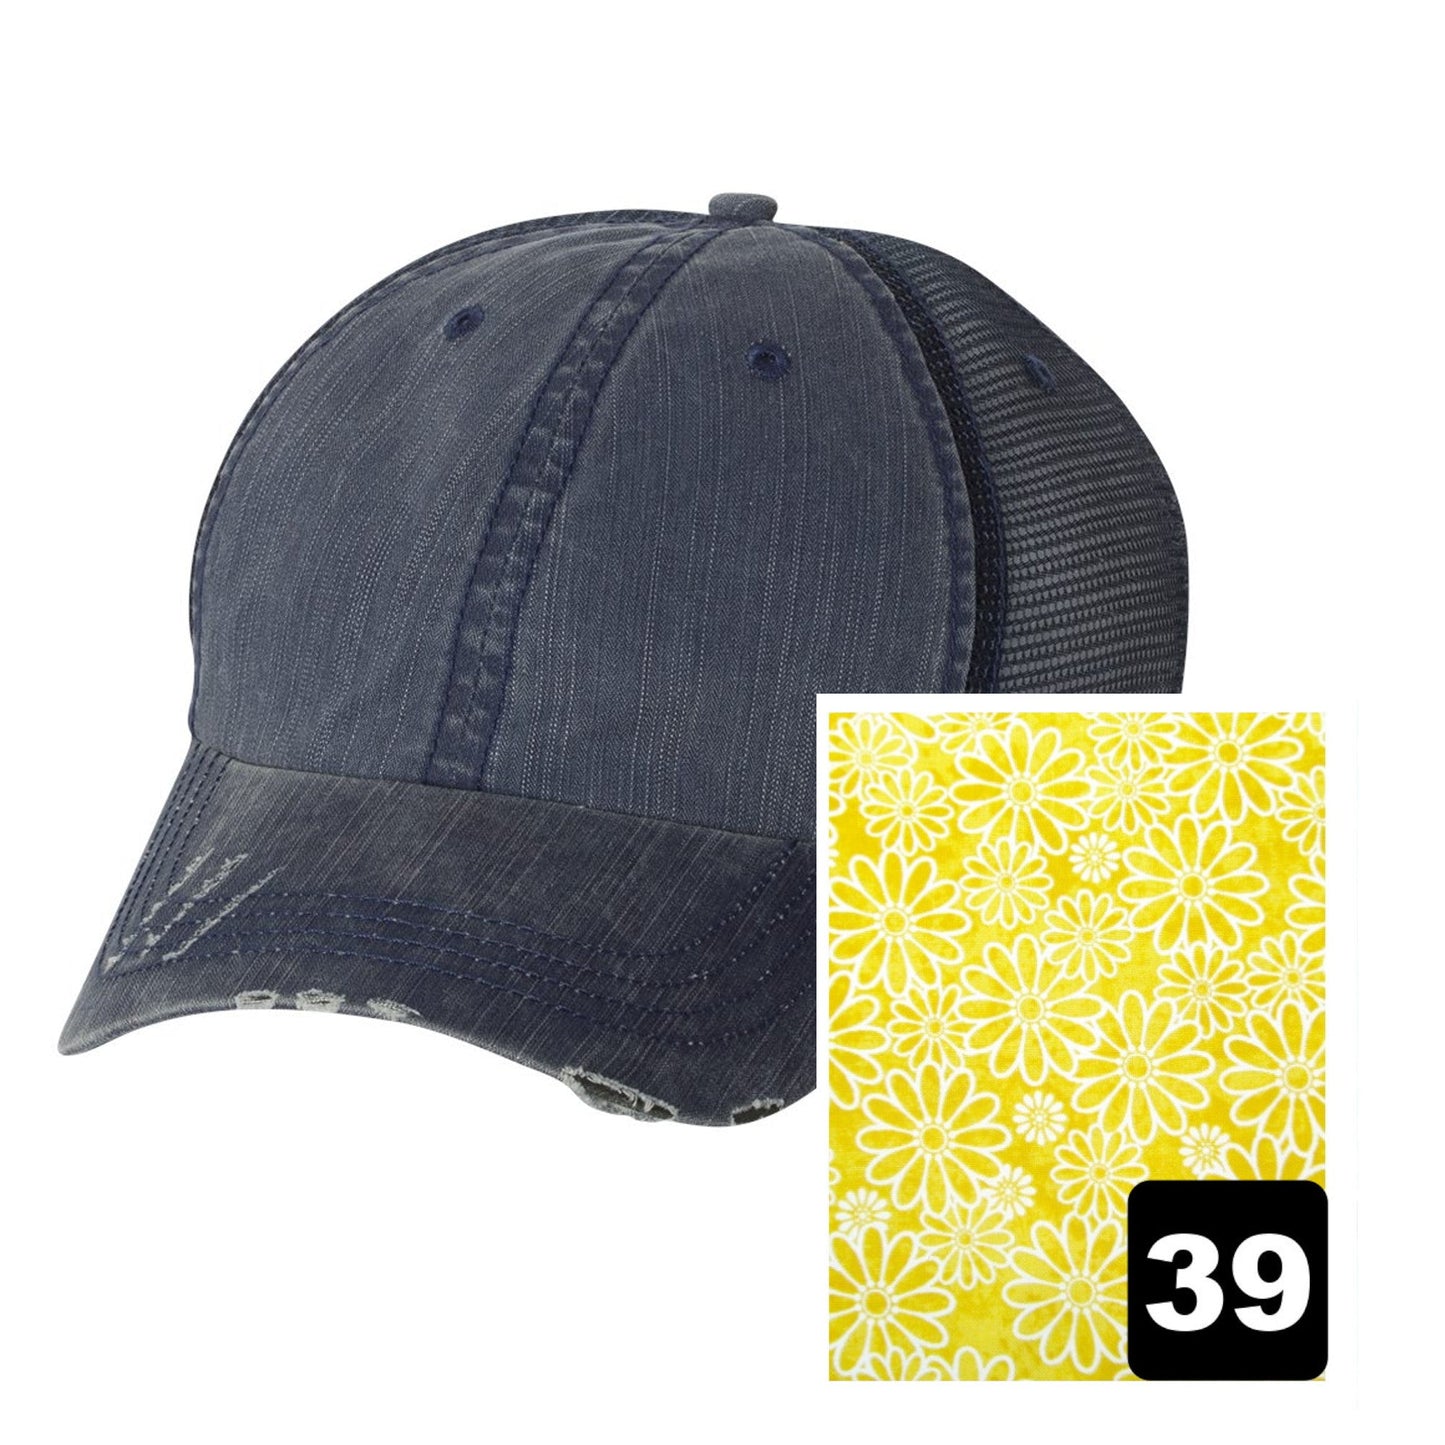 Vermont Hat | Navy Distressed Trucker Cap | Many Fabric Choices